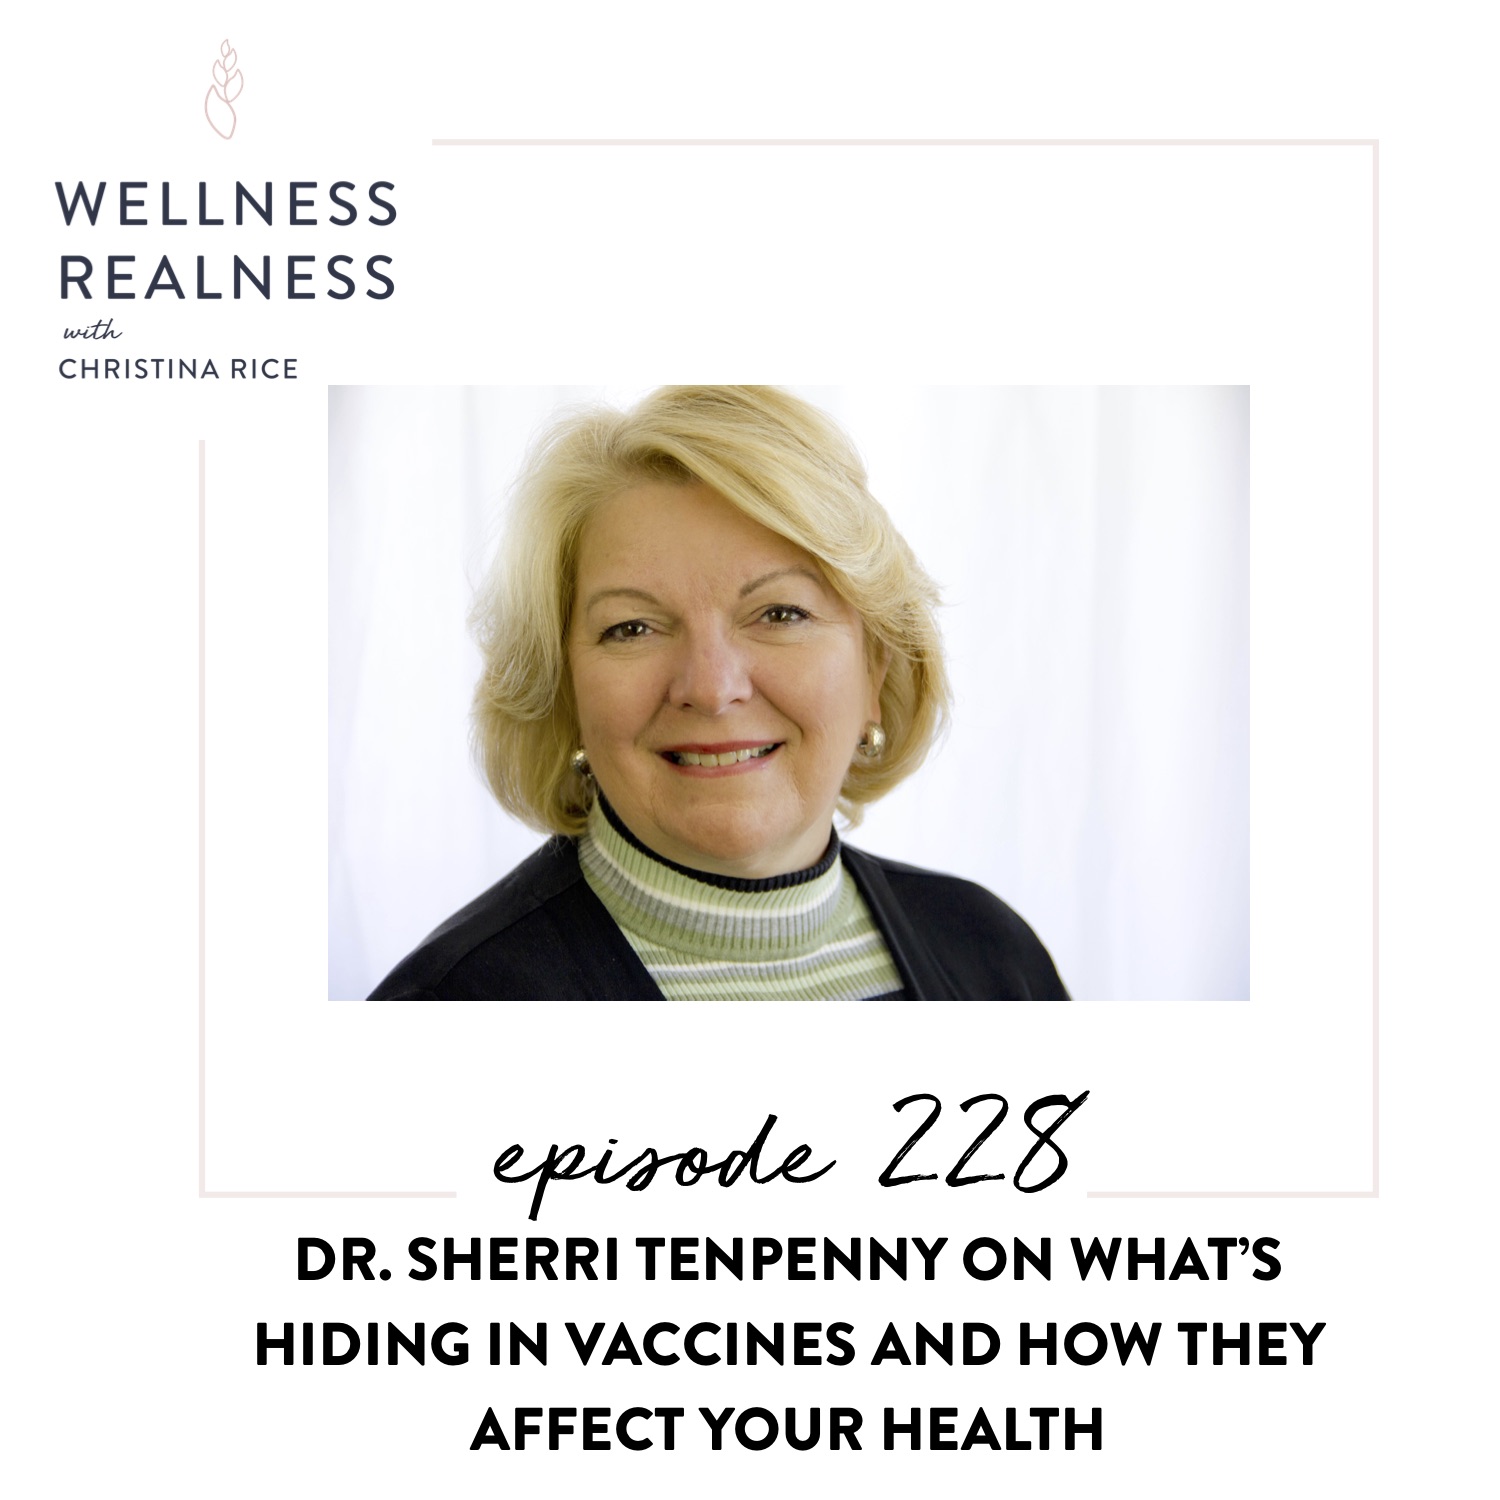 228: Dr. Sherri Tenpenny on What's Hiding in Vaccines and How They Affect Your Health